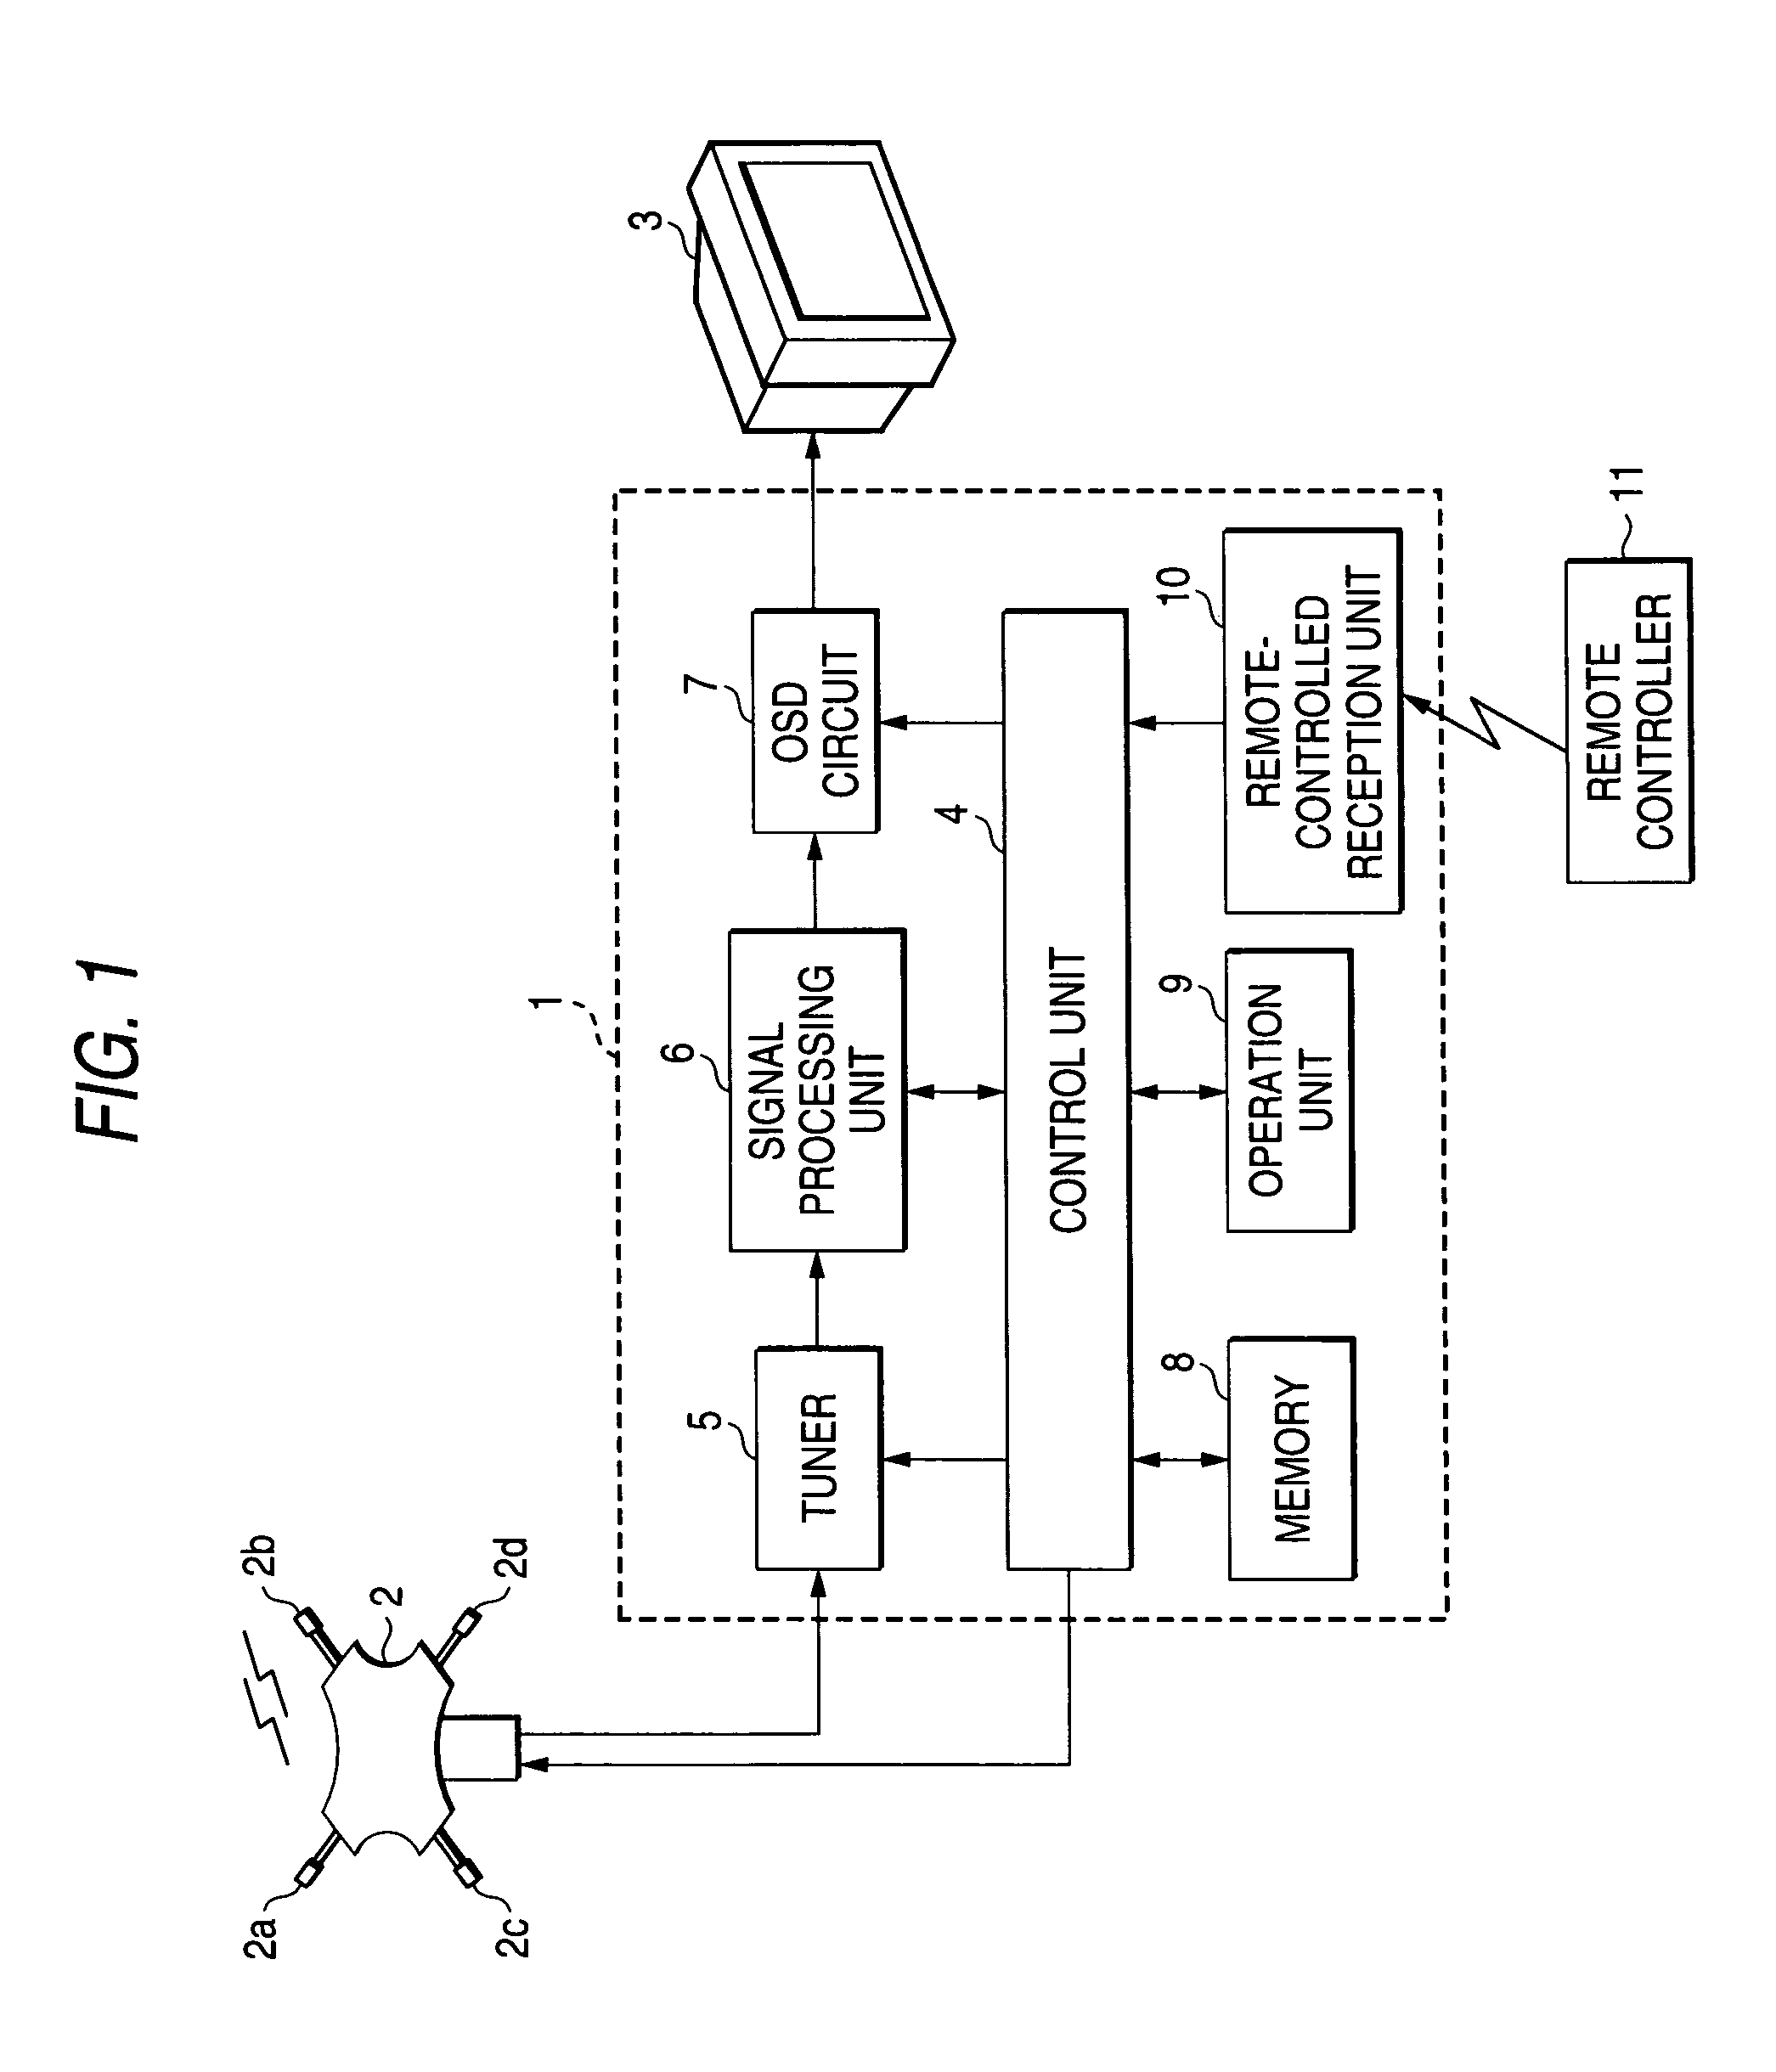 Broadcast receiver with selective scanning and signal retrieval